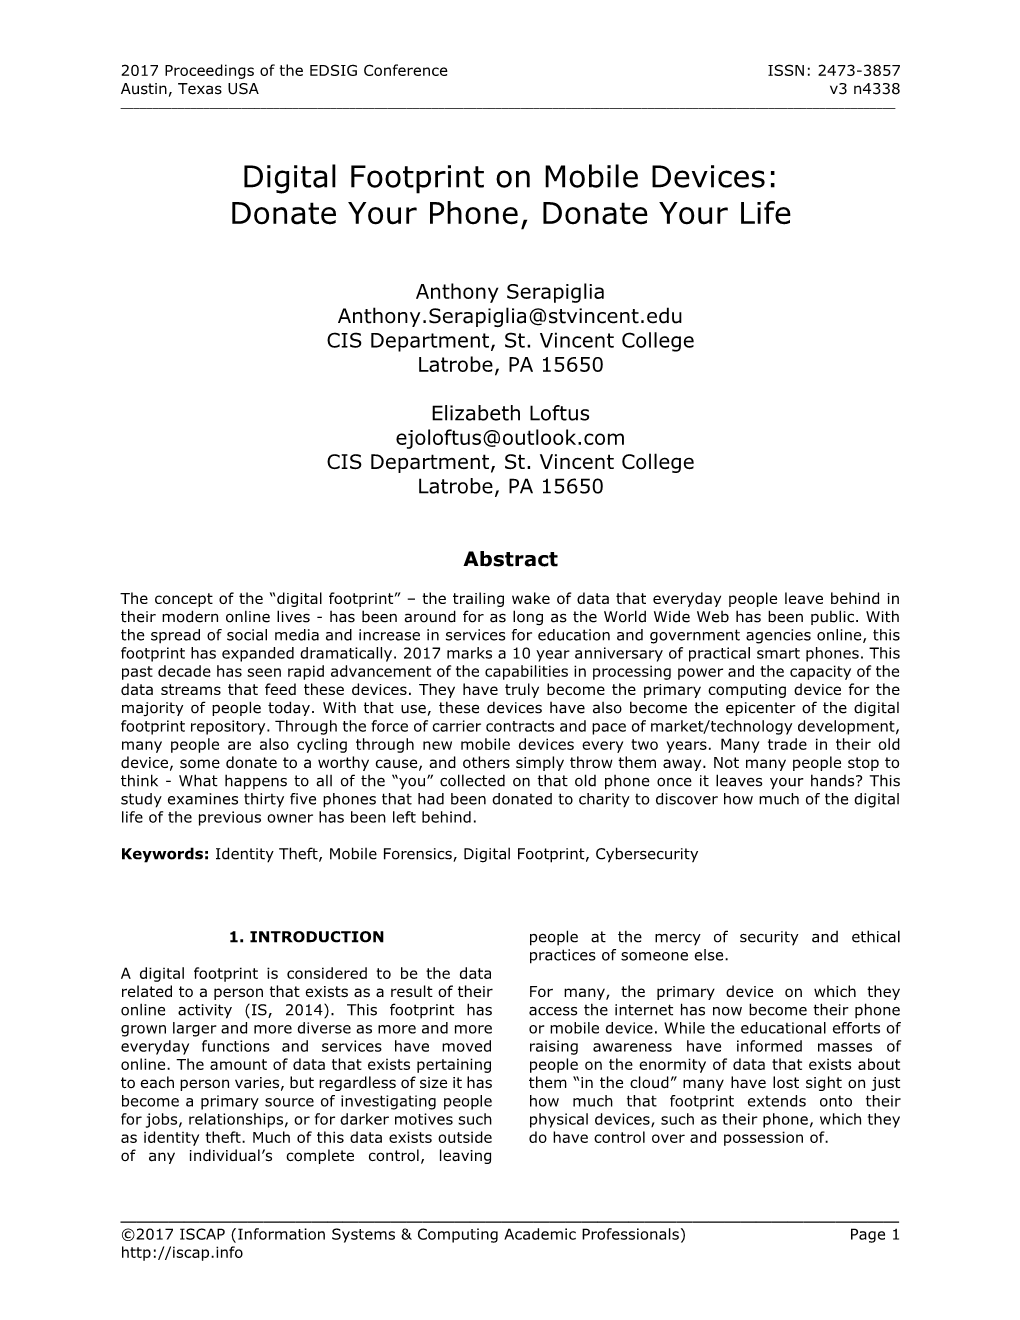 Digital Footprint on Mobile Devices: Donate Your Phone, Donate Your Life